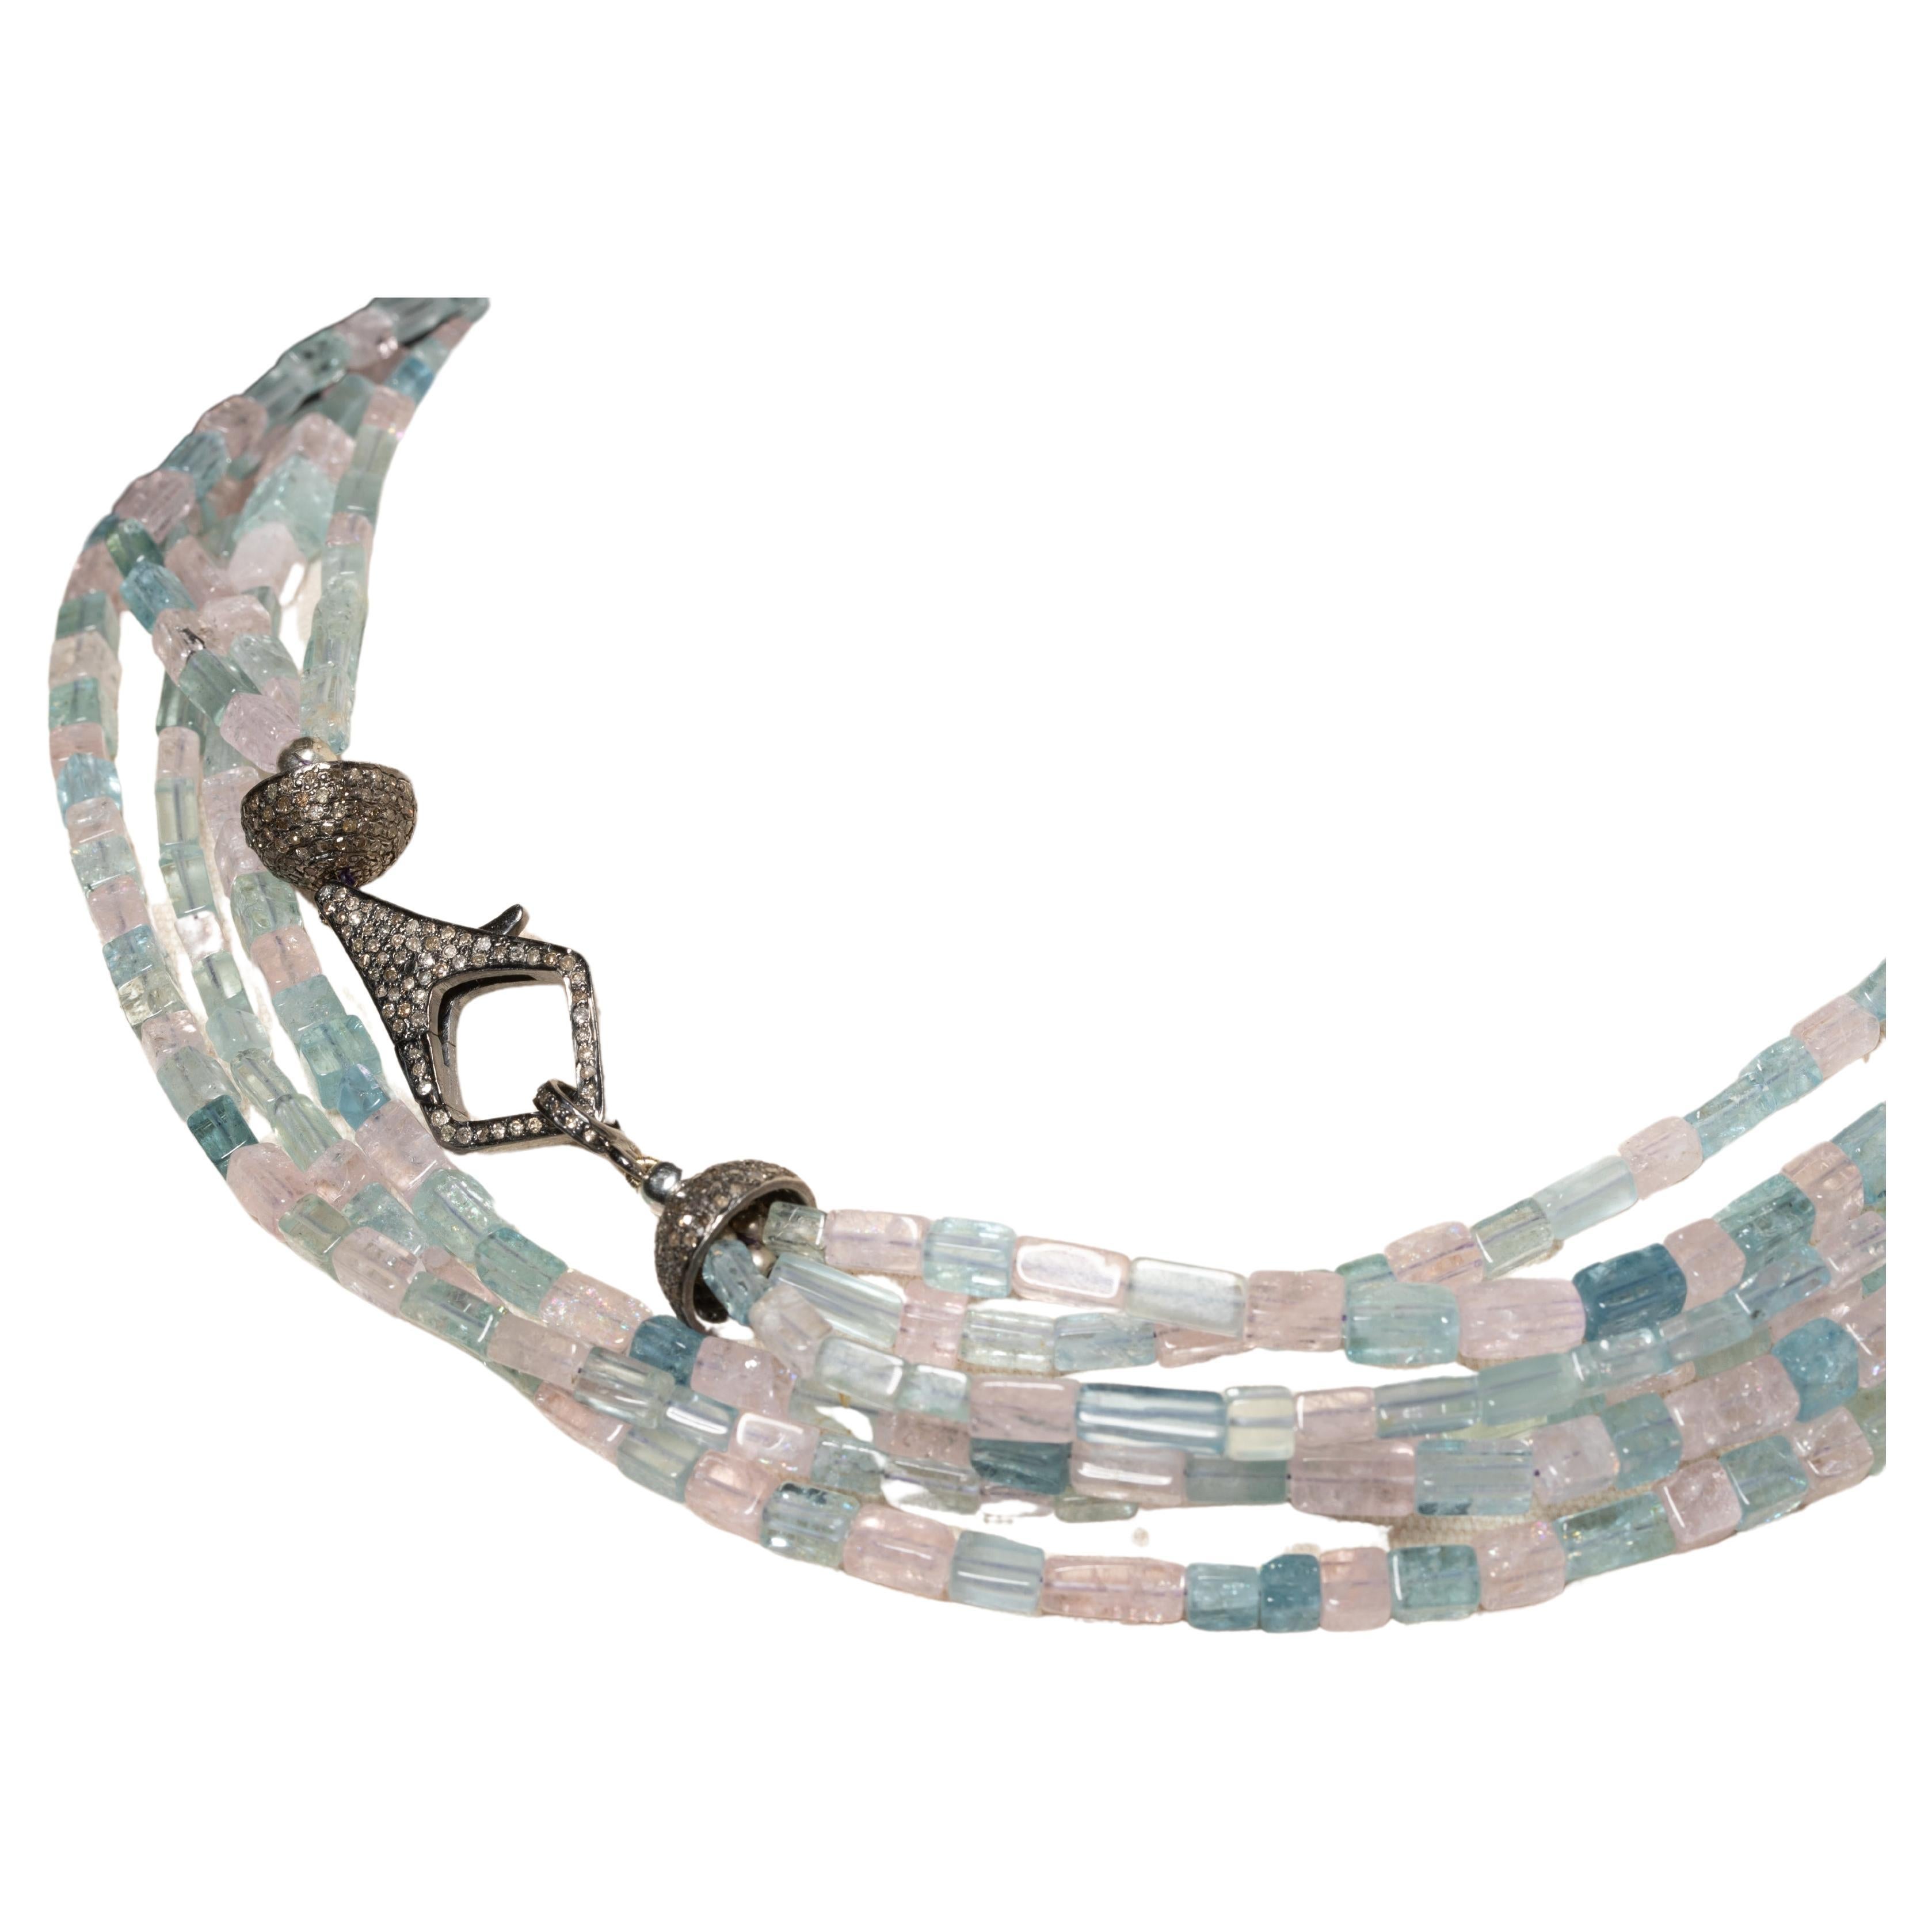 A long triple-strand or doubled six-strand necklace of beveled aquamarine and morganite (which is a pink aquamarine as it is in the same beryl family).  With a pave`-set diamond clasp and end-caps set in an oxidized sterling silver, which you can